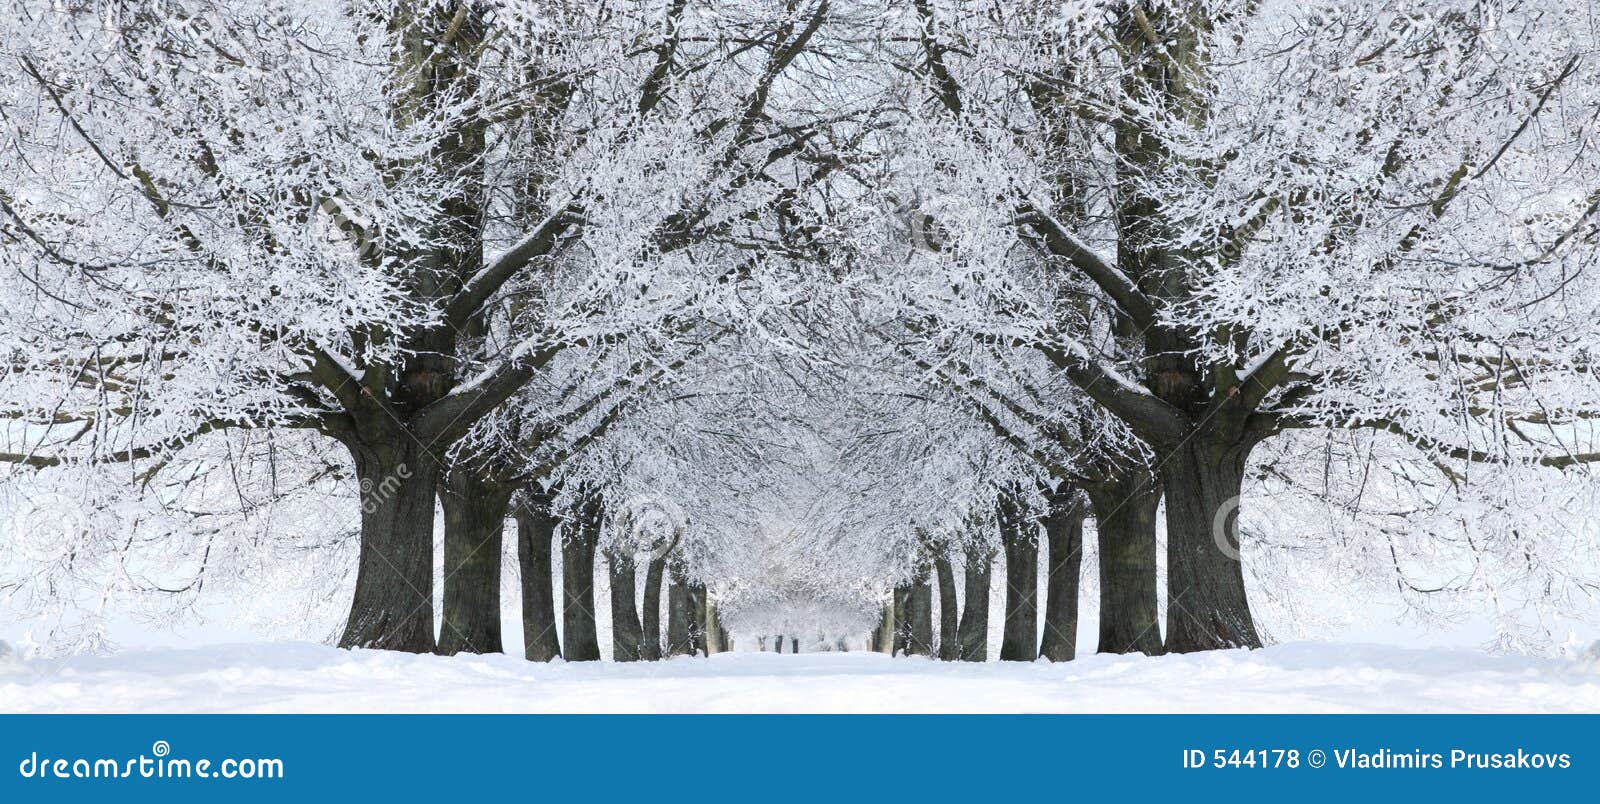 winter snow trees, park road perspective, white alley tree rows